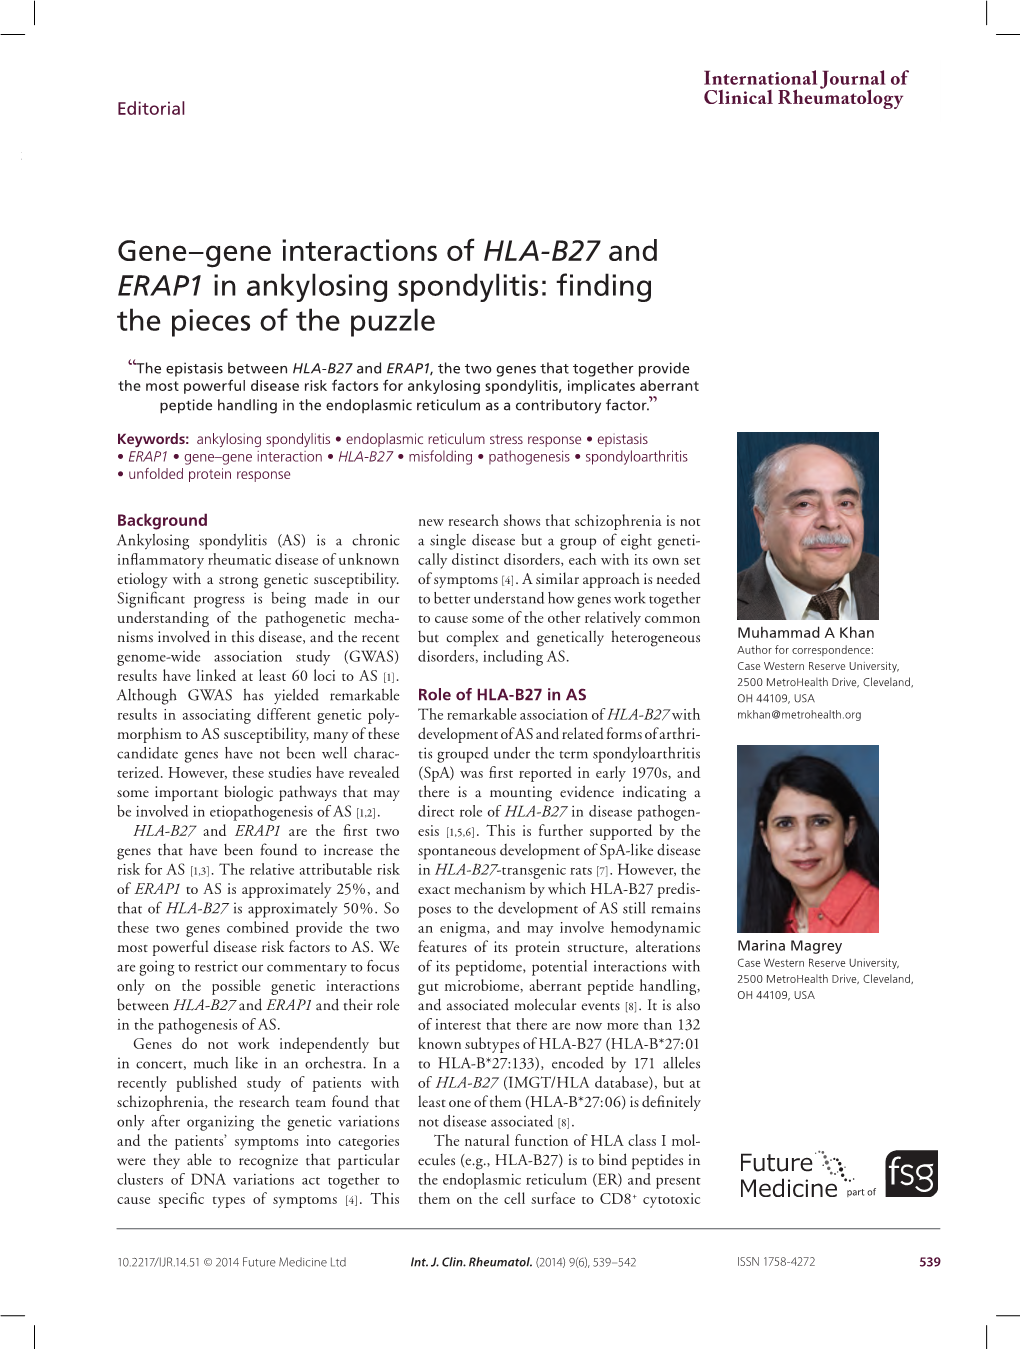 Gene–Gene Interactions of HLA-B27 and ERAP1 in Ankylosing Spondylitis: Finding the Pieces of the Puzzle